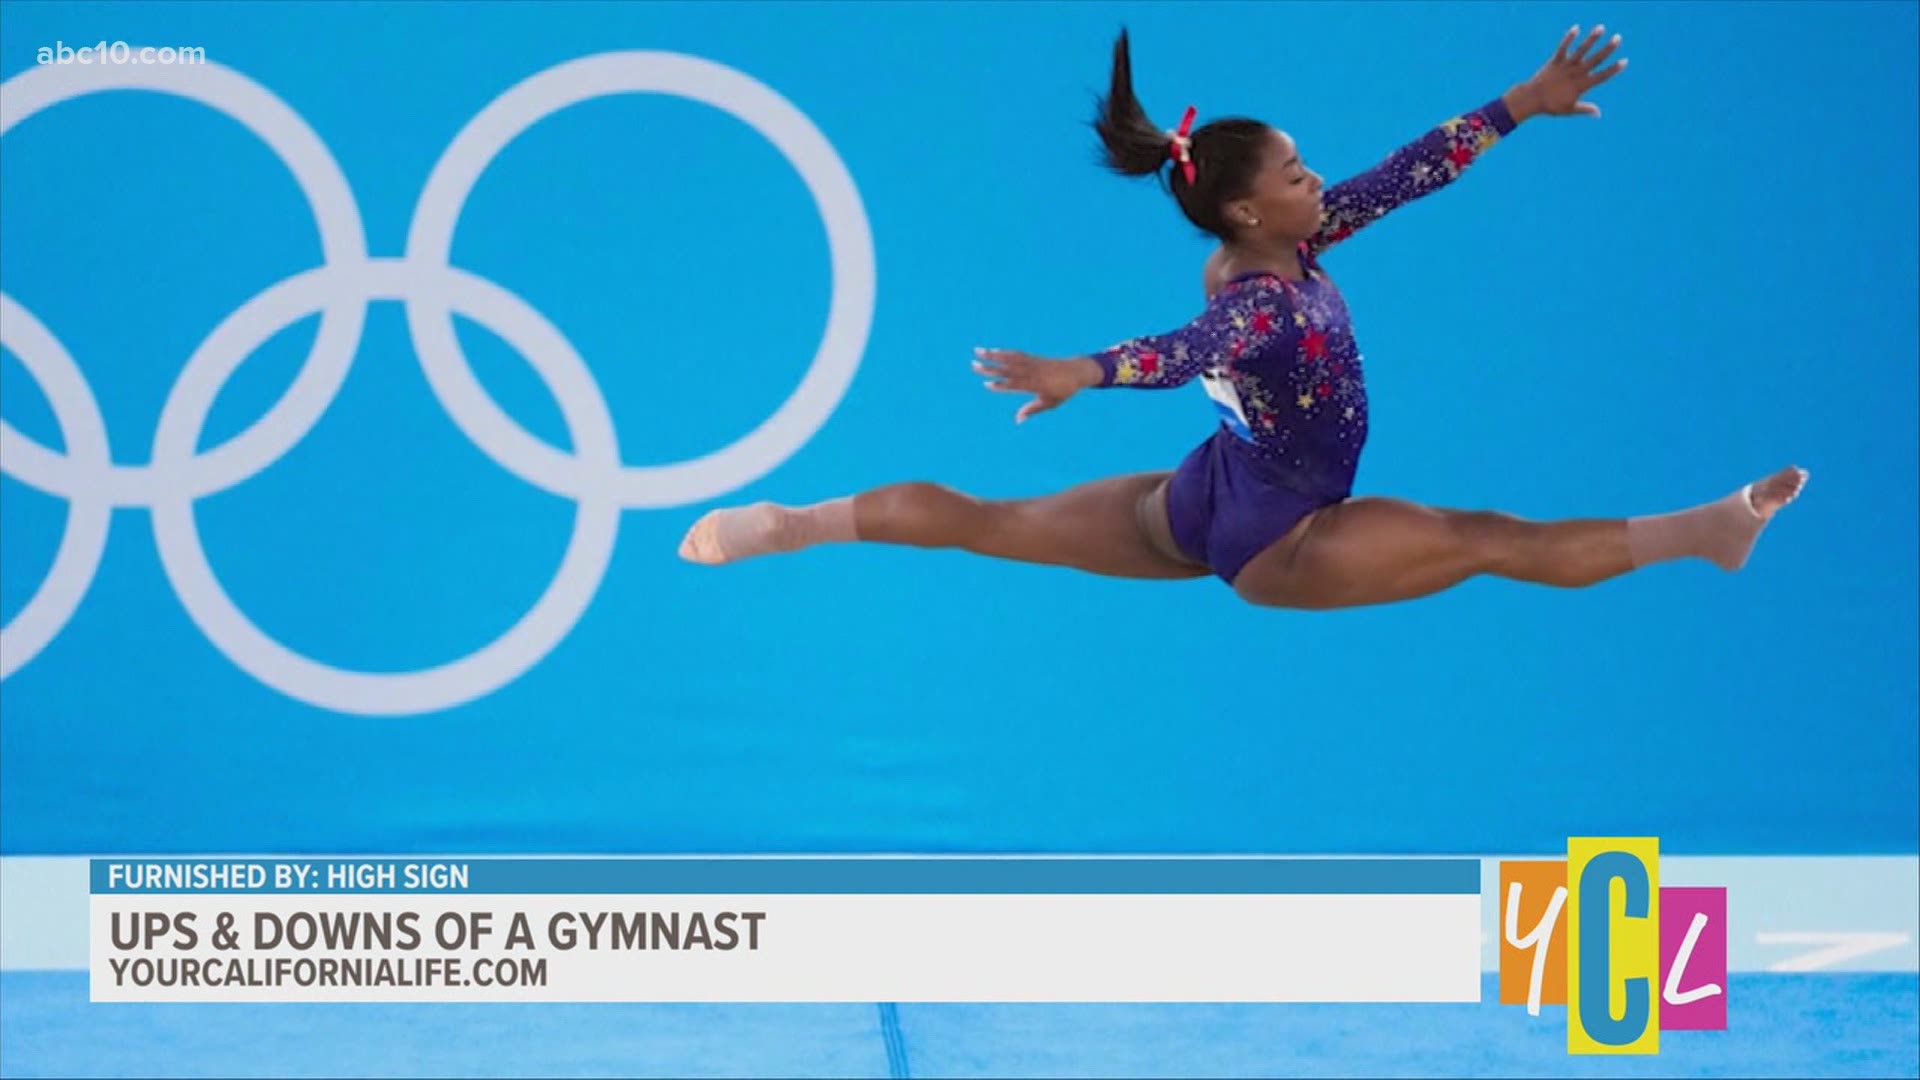 Simone Biles has made headlines after withdrawing from team competition in the Tokyo Olympics, and we hear from an elite gymnast about the pressure of the spotlight.